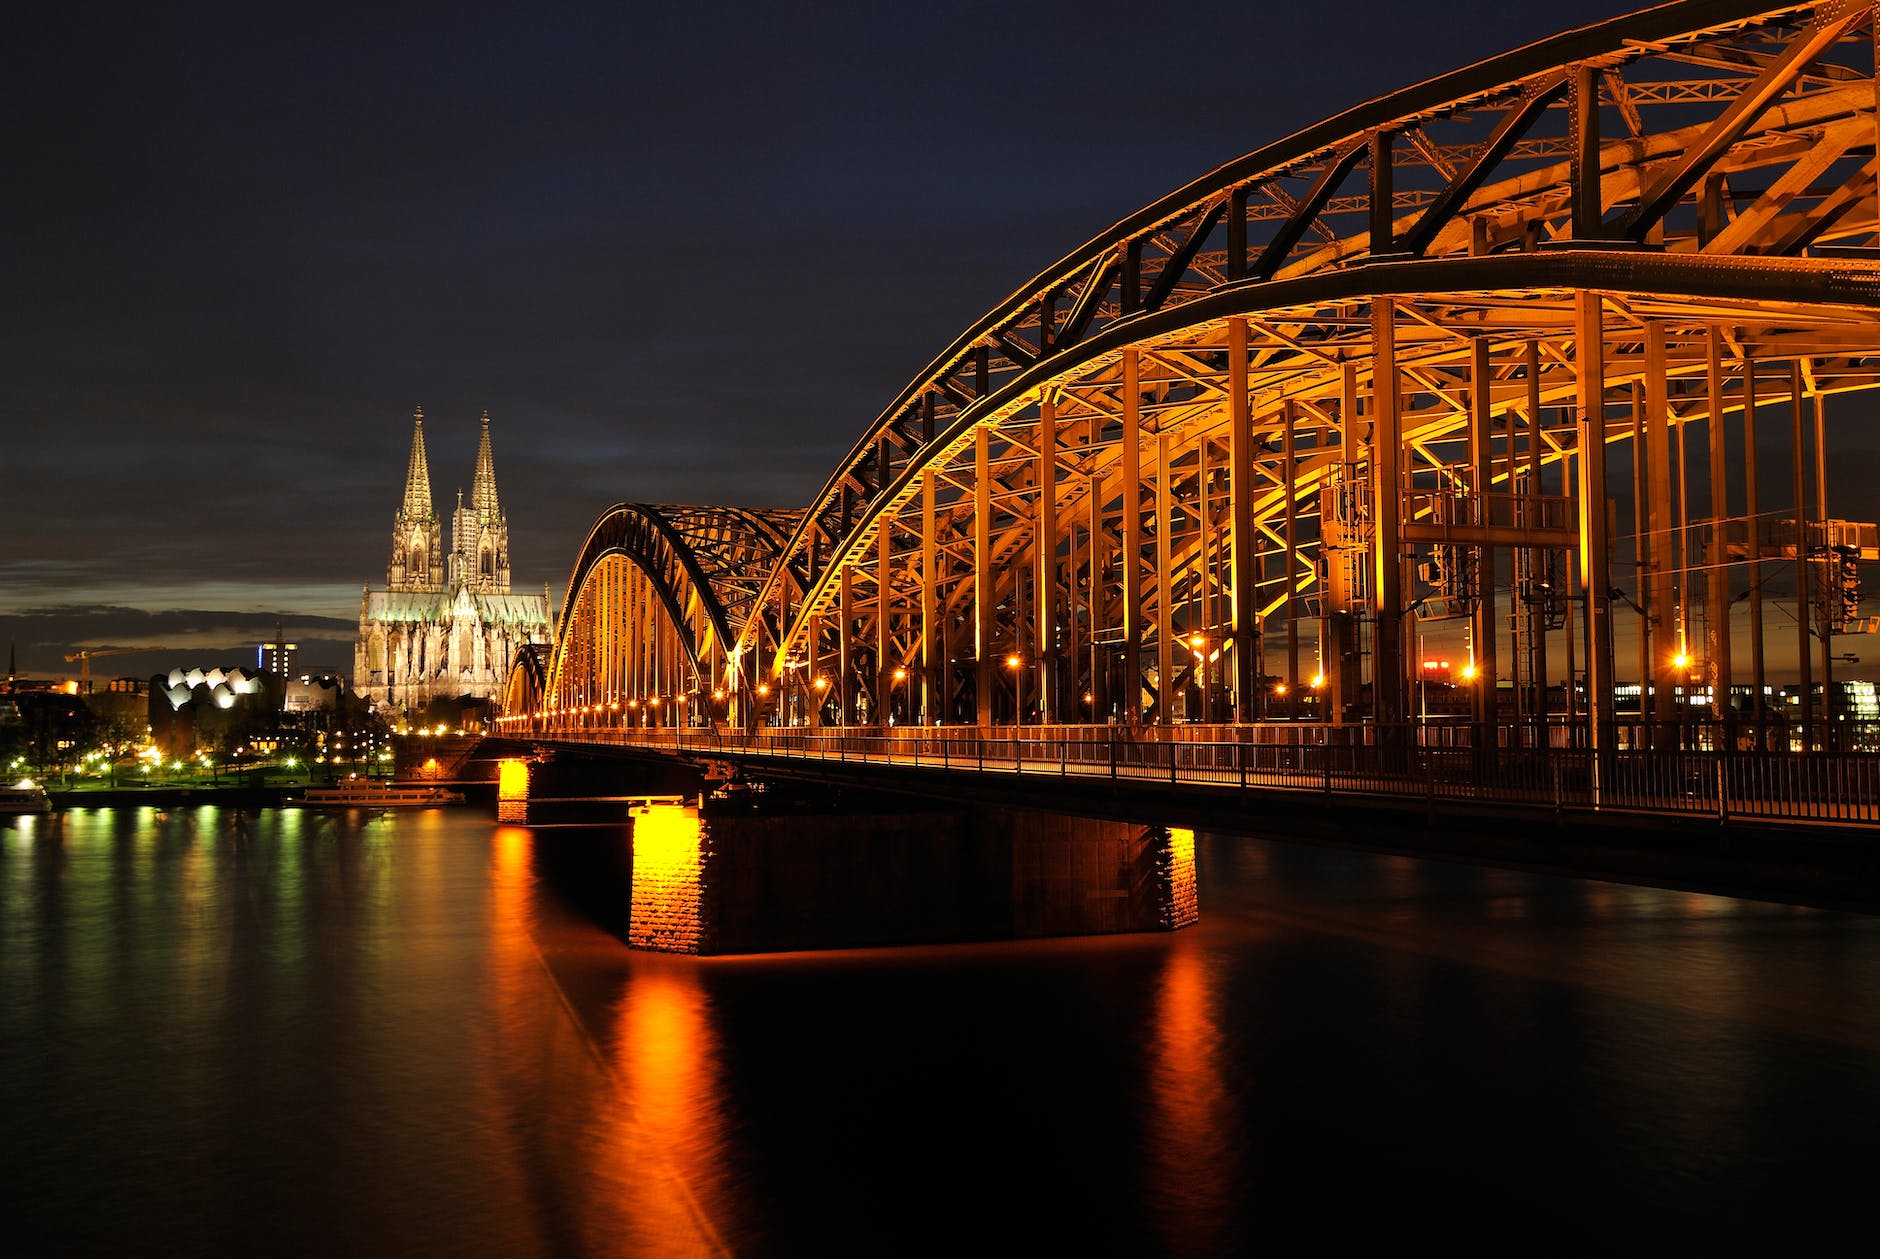 architectural photo of bridge during nighttime